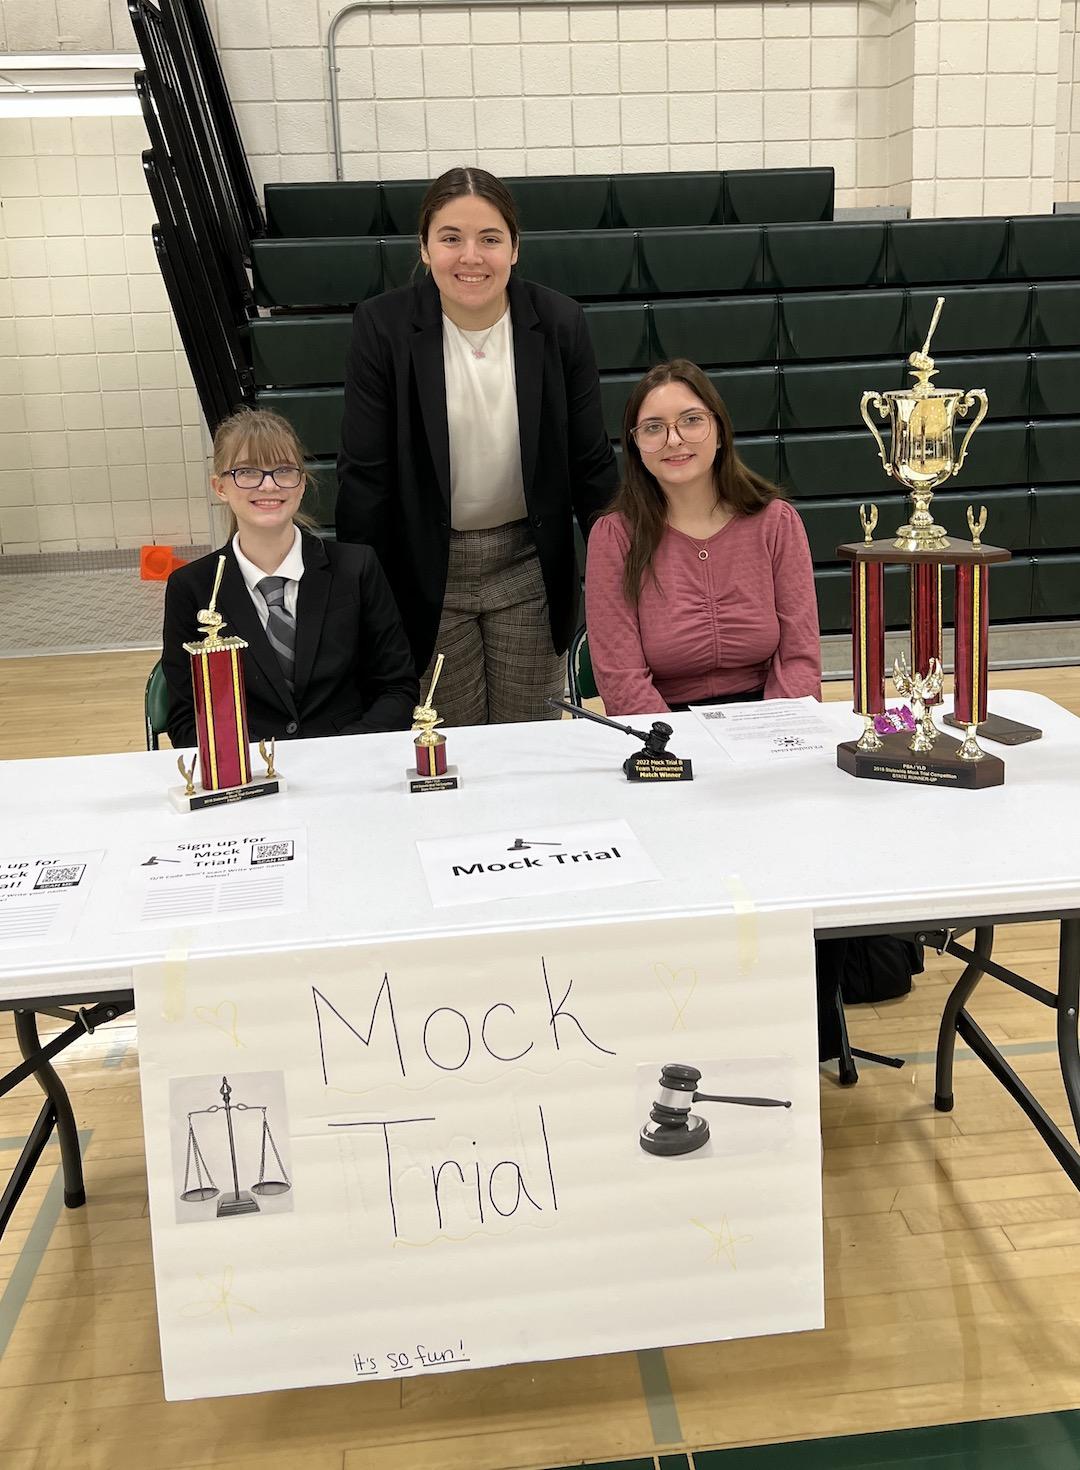 The Mock Trial team displayed some of their trophies from prior seasons